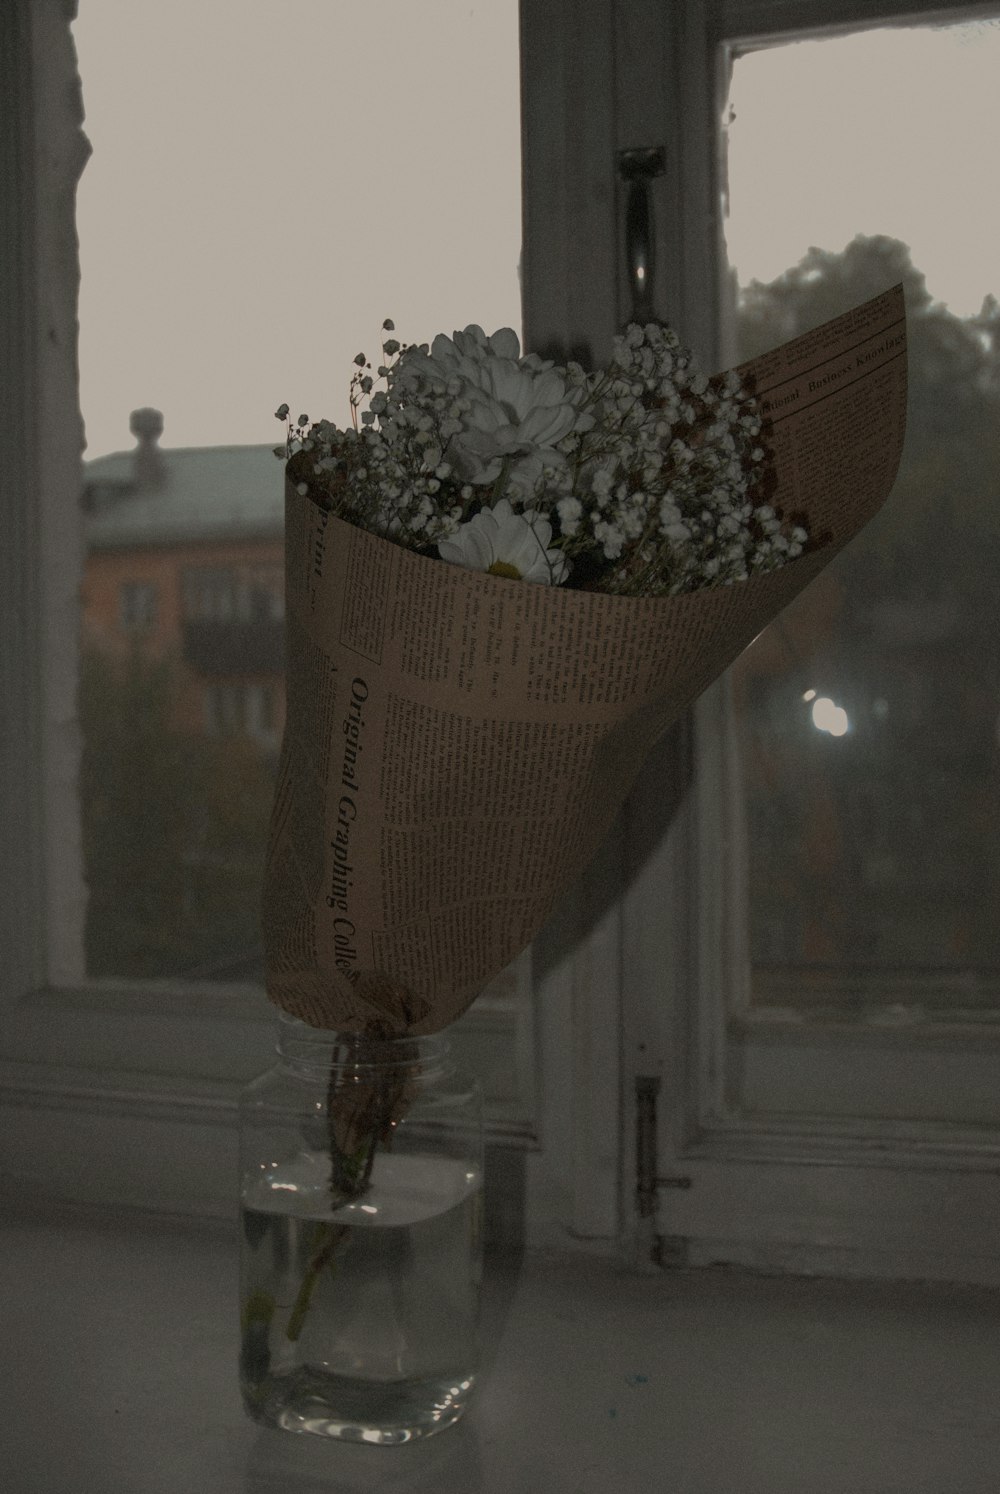 a bouquet of flowers in a vase on a window sill